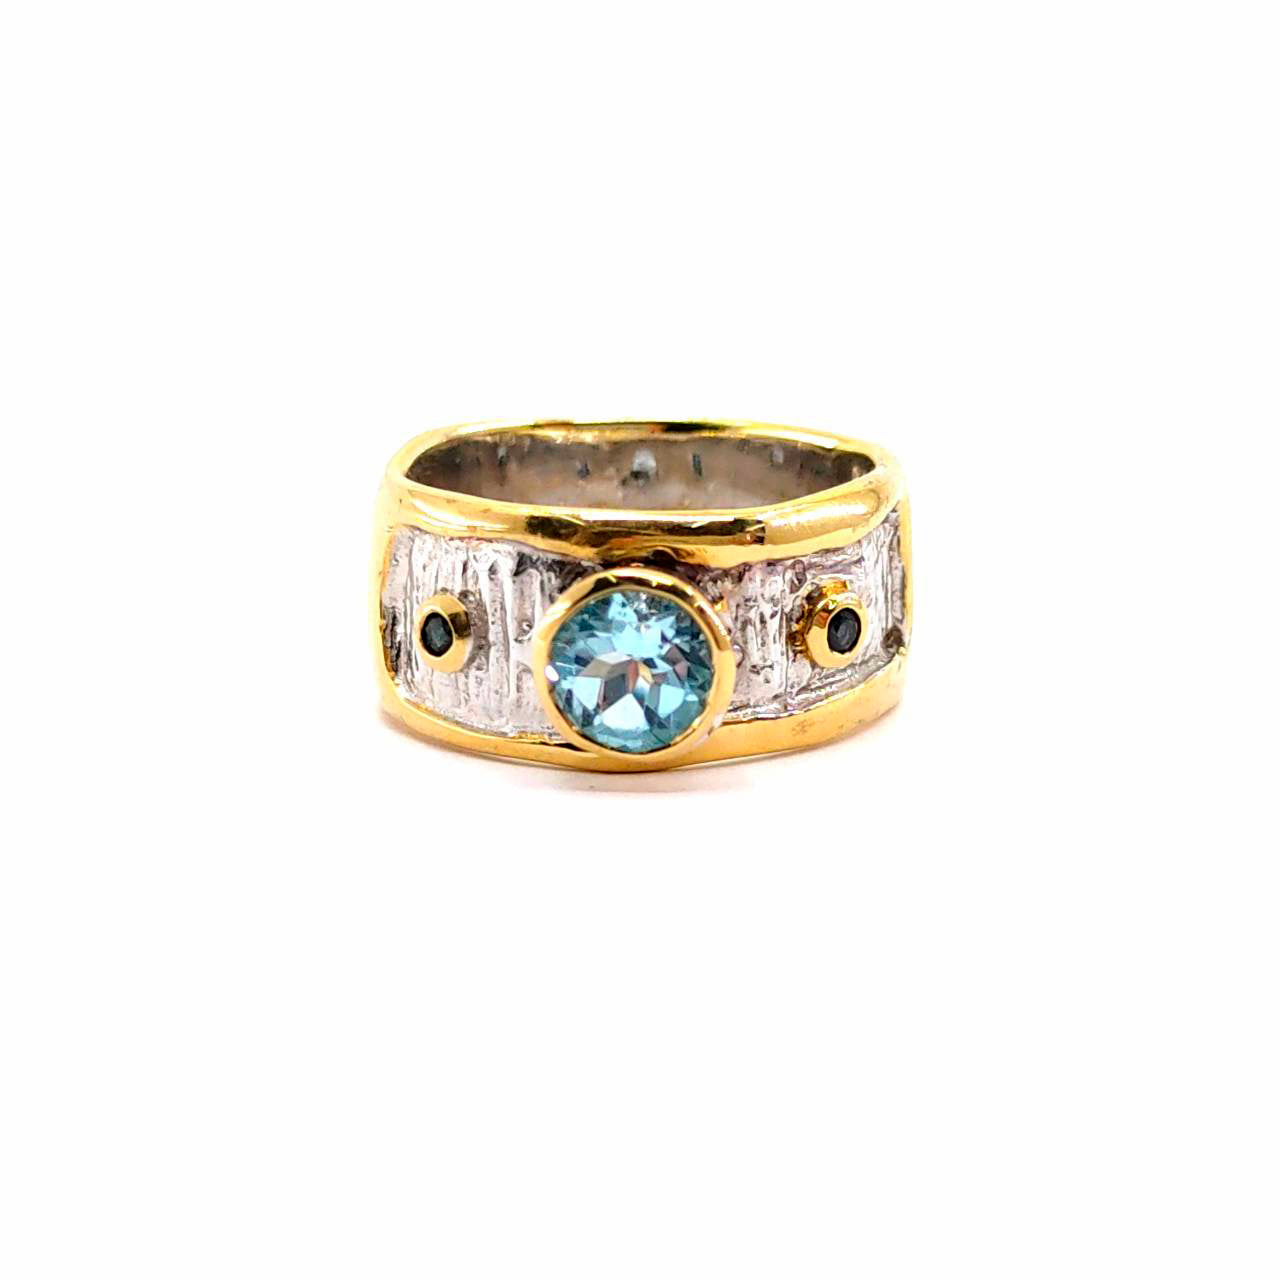 Alice - 925 Sterling Silver Ring, Decorated with Blue Topaz and Sapphires, Plated with 3 Micron 22K Yellow Gold and White Rhodium